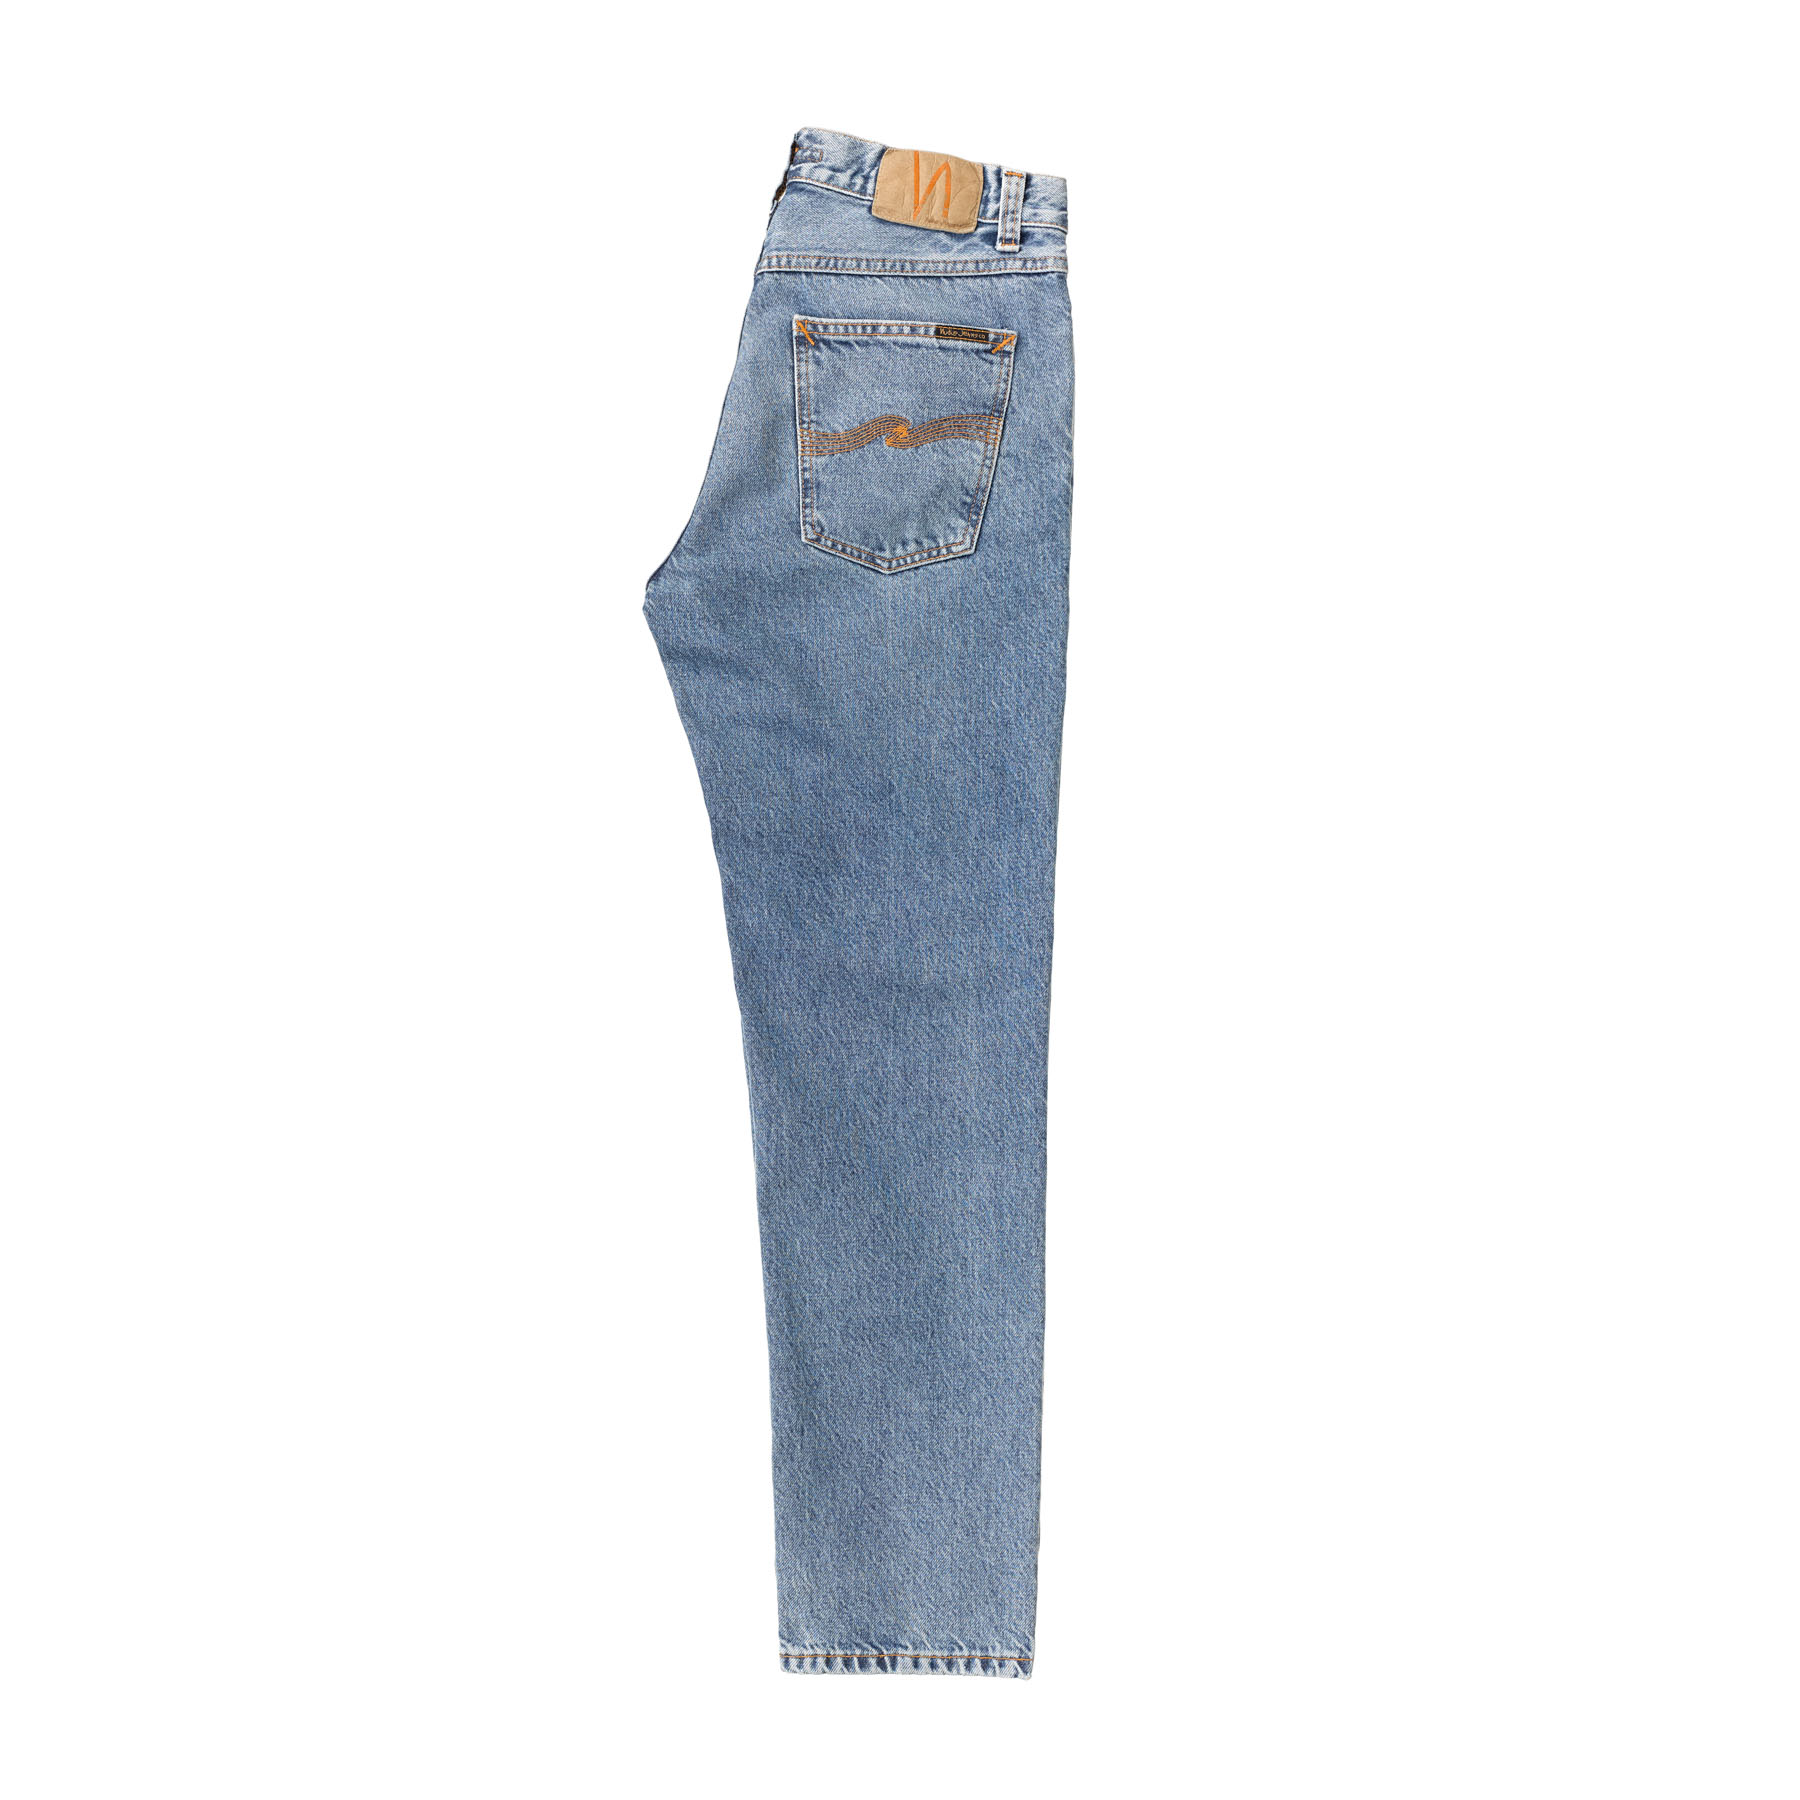 NUDIE JEANS Jeans Gritty Jackson blue traces 30/30